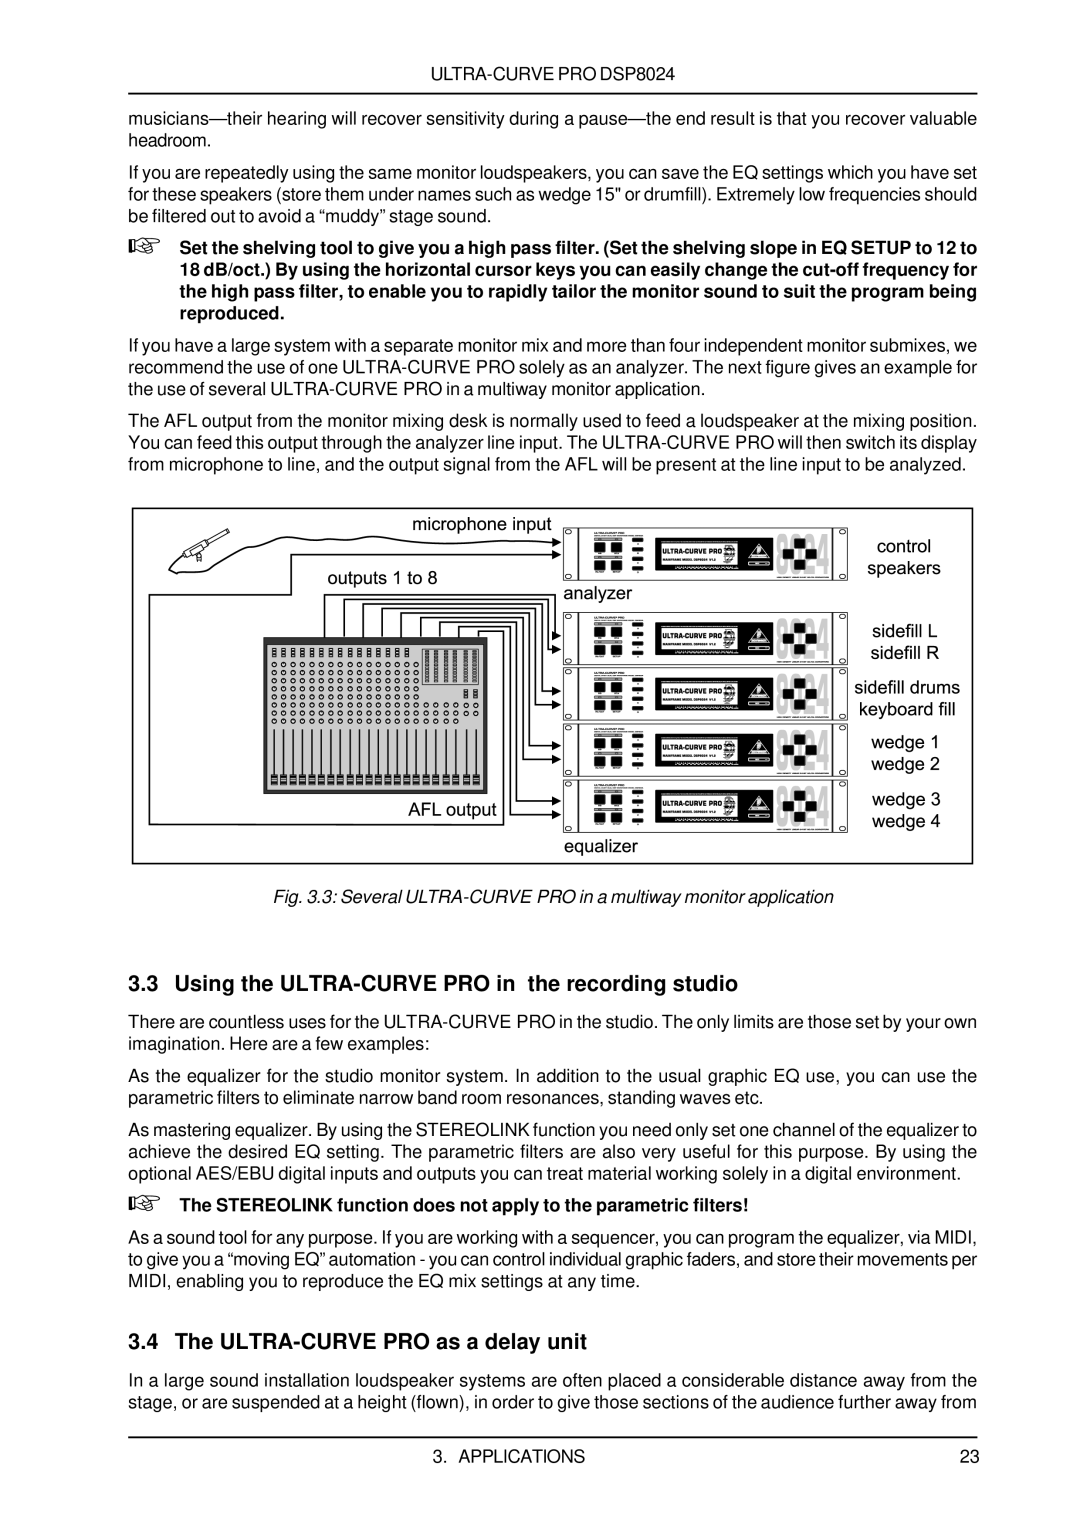 Behringer DSP8024 user manual The ULTRA-CURVEPRO as a delay unit 